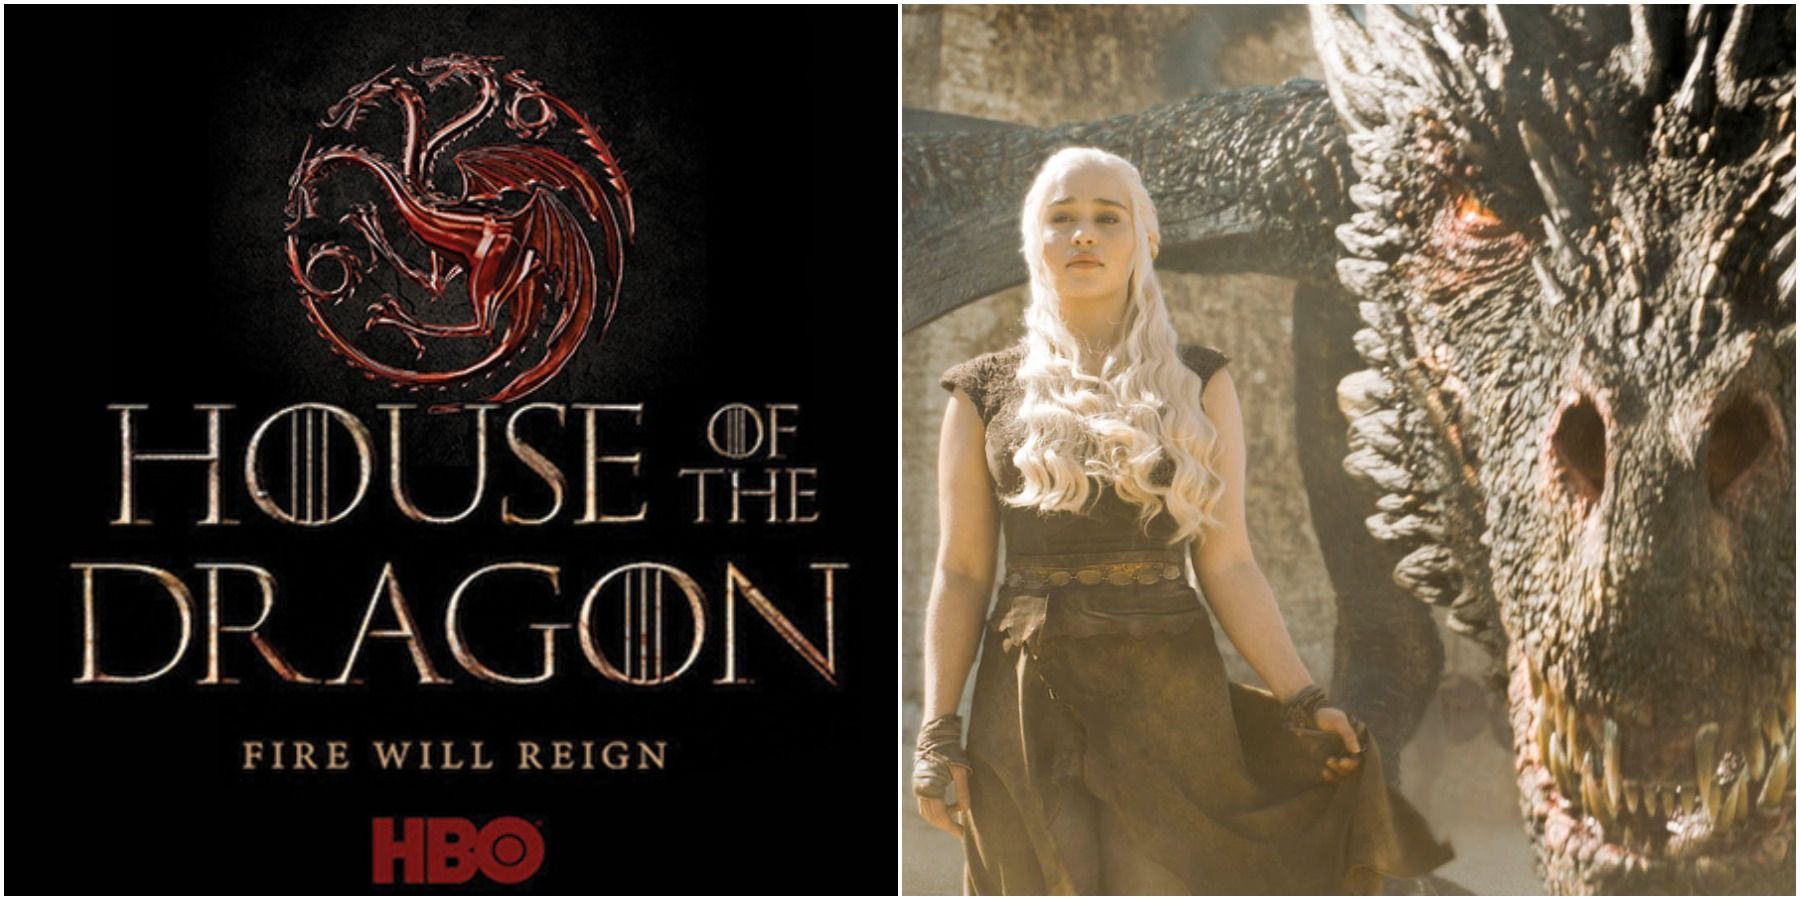 HBO's new 'Game of Thrones' show 'House of the Dragon' doesn't disappoint